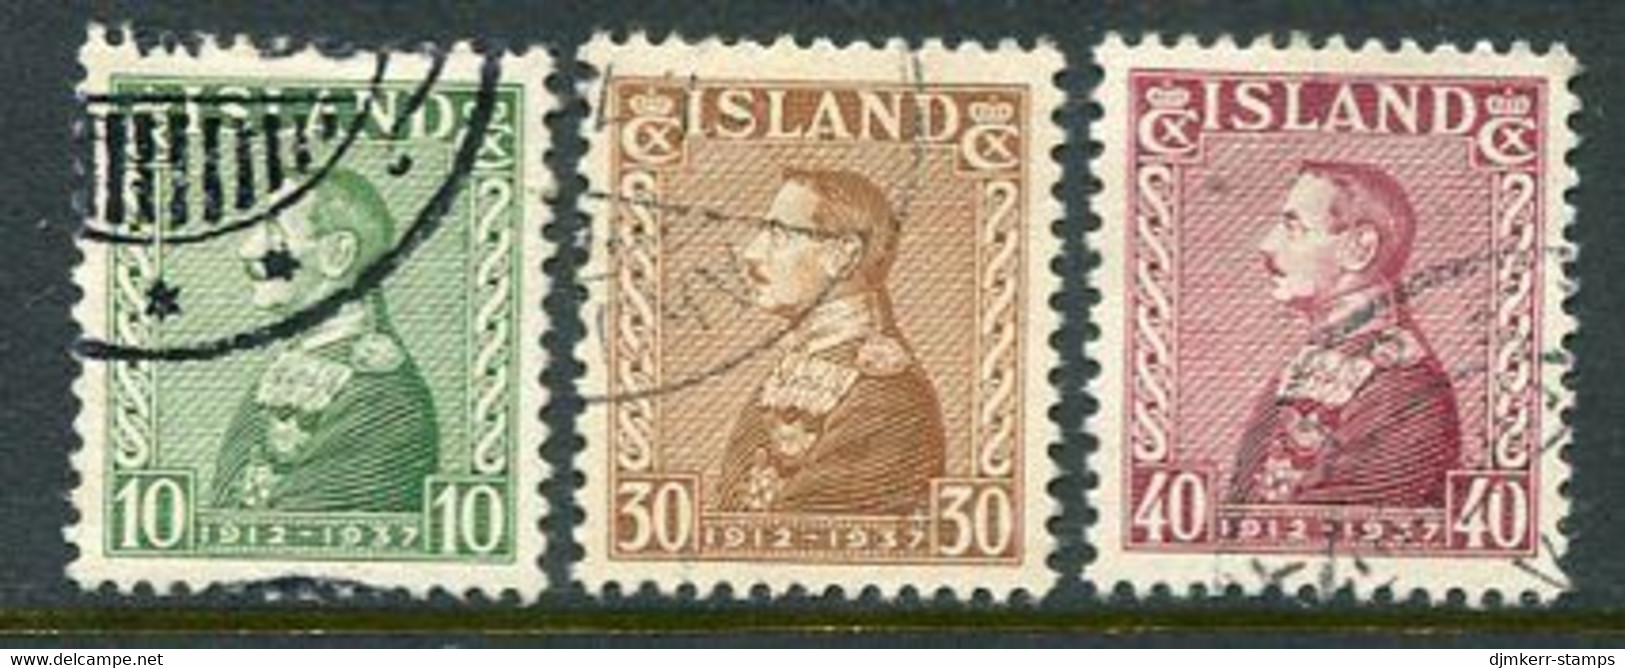 ICELAND  1937 25th Anniversary Of Regency Used.  Michel 187-189 - Usados